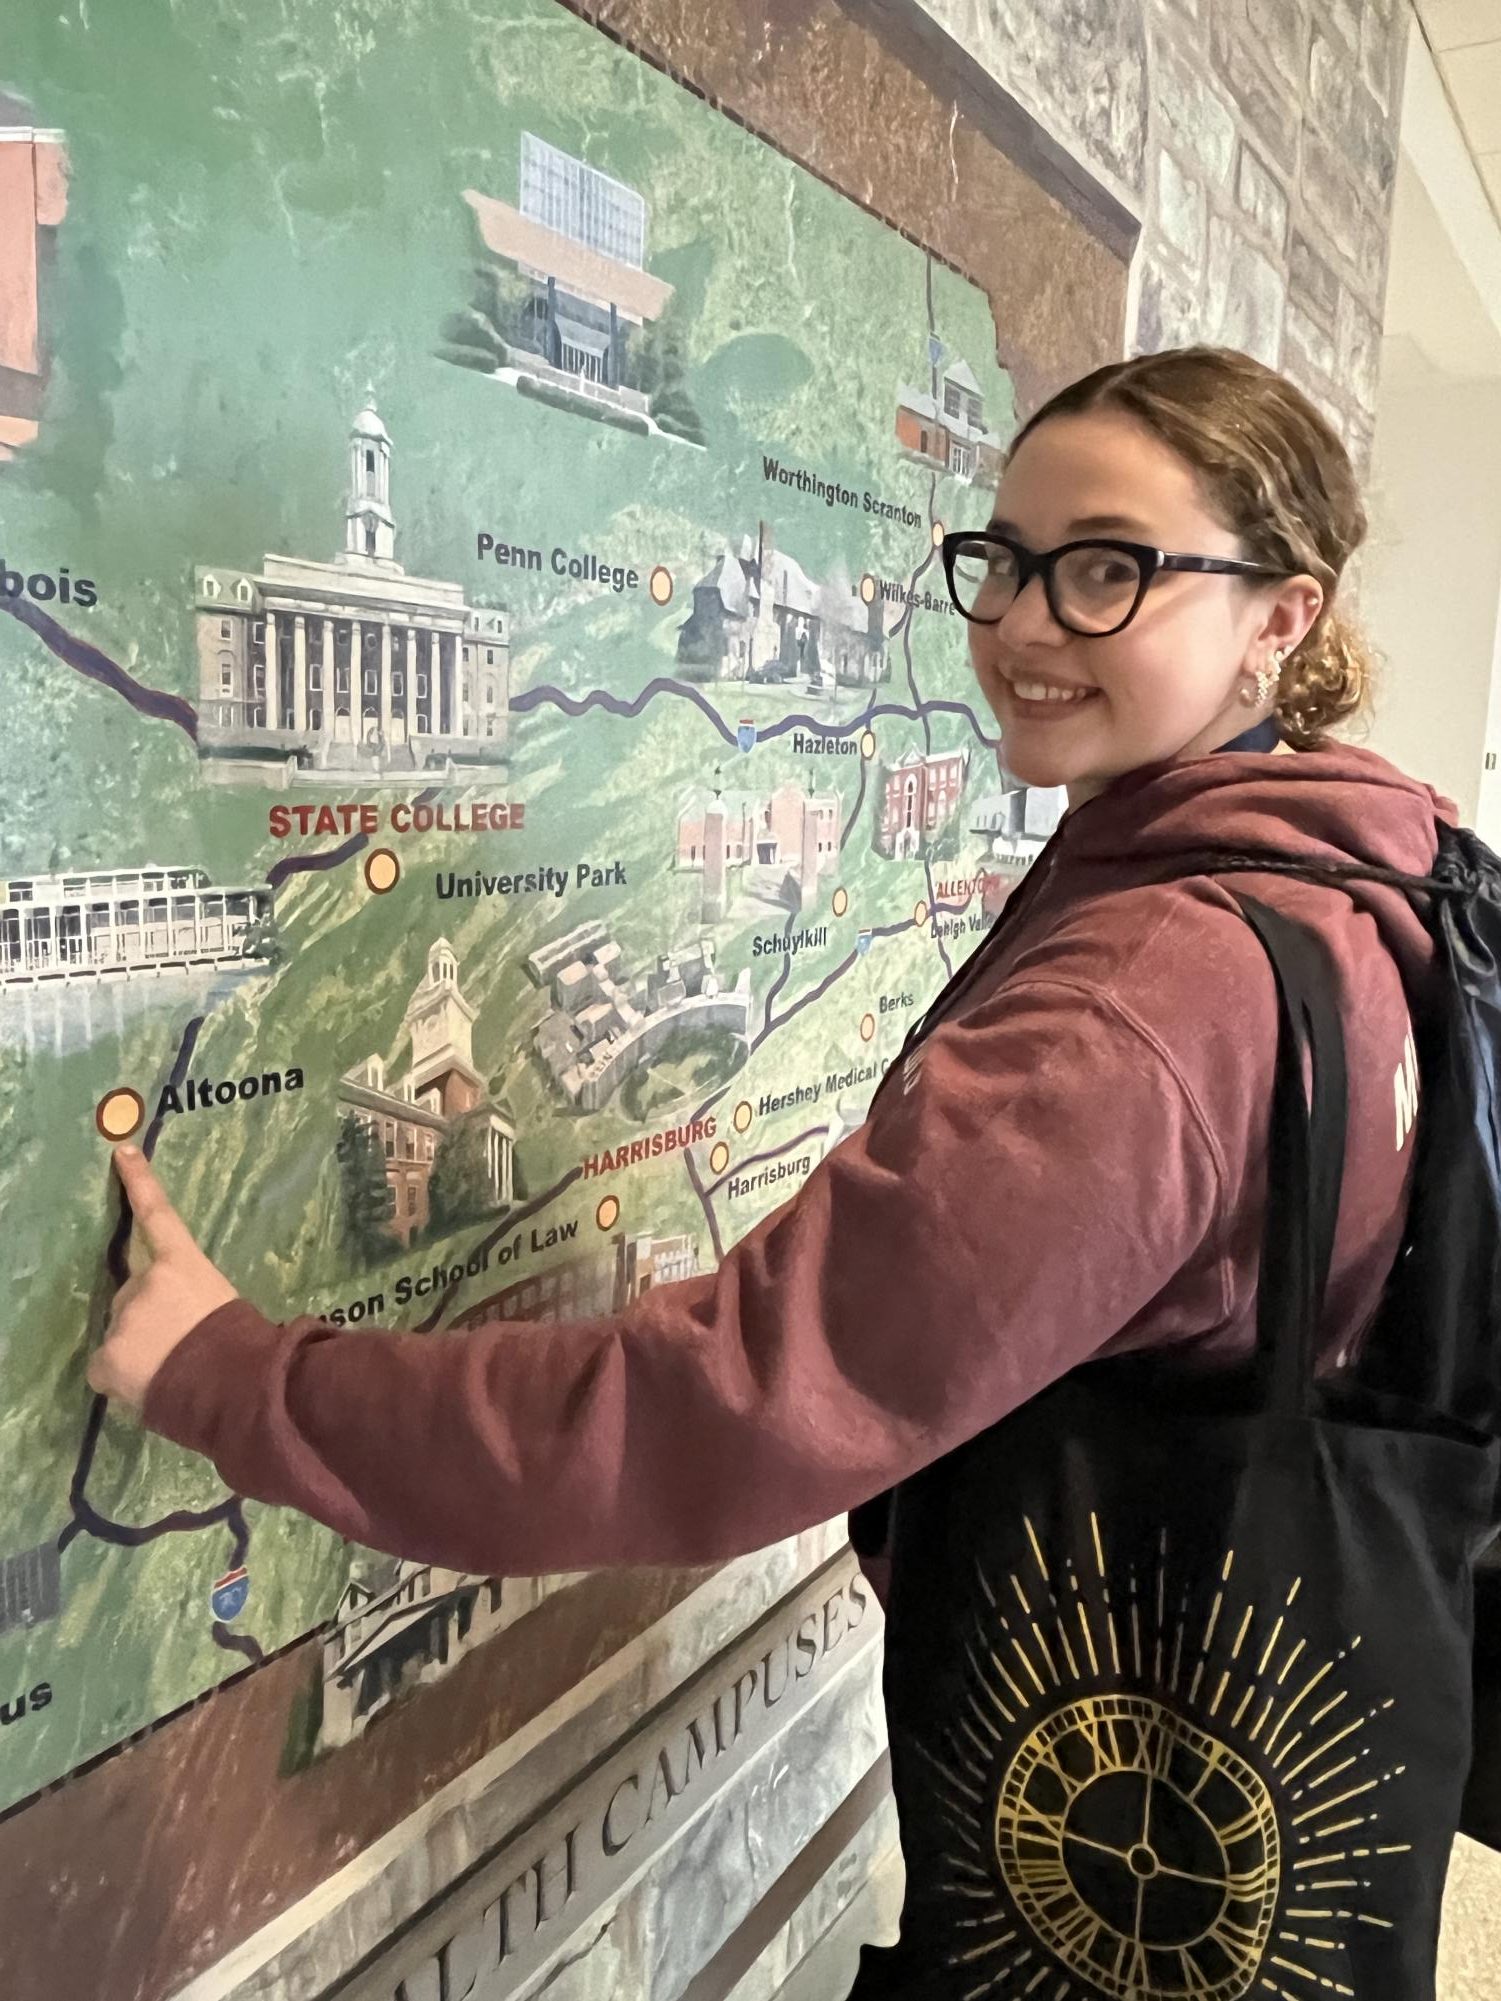 Our Turf. Associate editor Charlie Kephart poses with one of the various maps around the Hub on the Penn State campus. While State College is only a 45 minute drive from Altoona, Charlie wished she could go back more often to Penn State. 